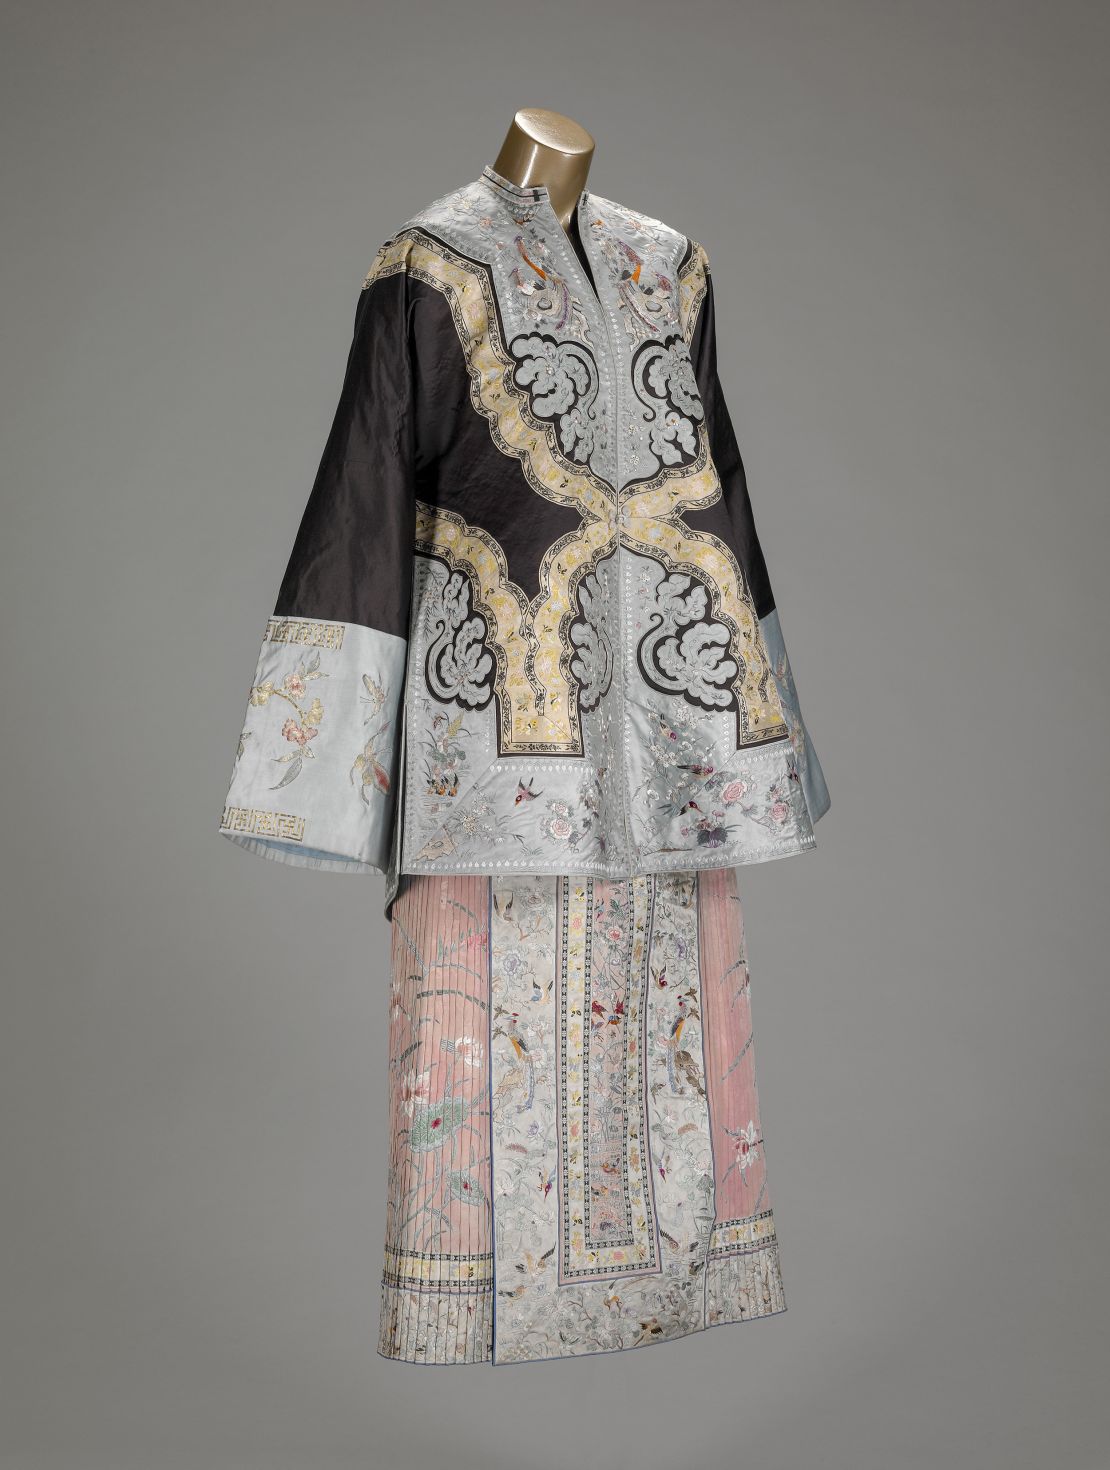 An example of a traditional silk horse face skirt from the late Qing dynasty.